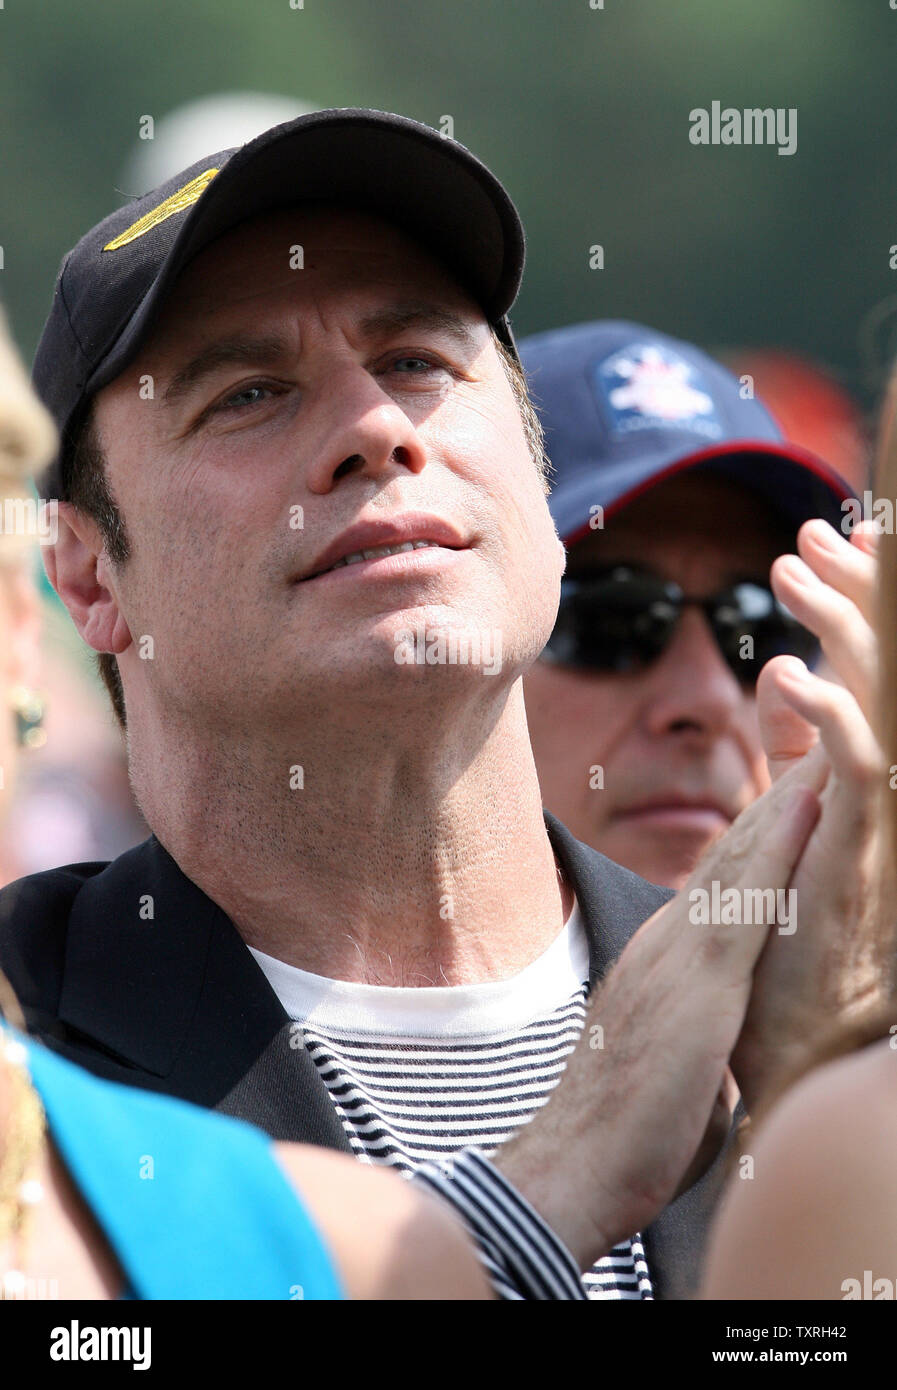 Actor John Travolta claps for National Baseball Hall of Fame's newest member, friend Cal Ripken Jr., during induction ceremonies in Cooperstown, New York on July 29, 2007.  (UPI Photo/Bill Greenblatt) Stock Photo